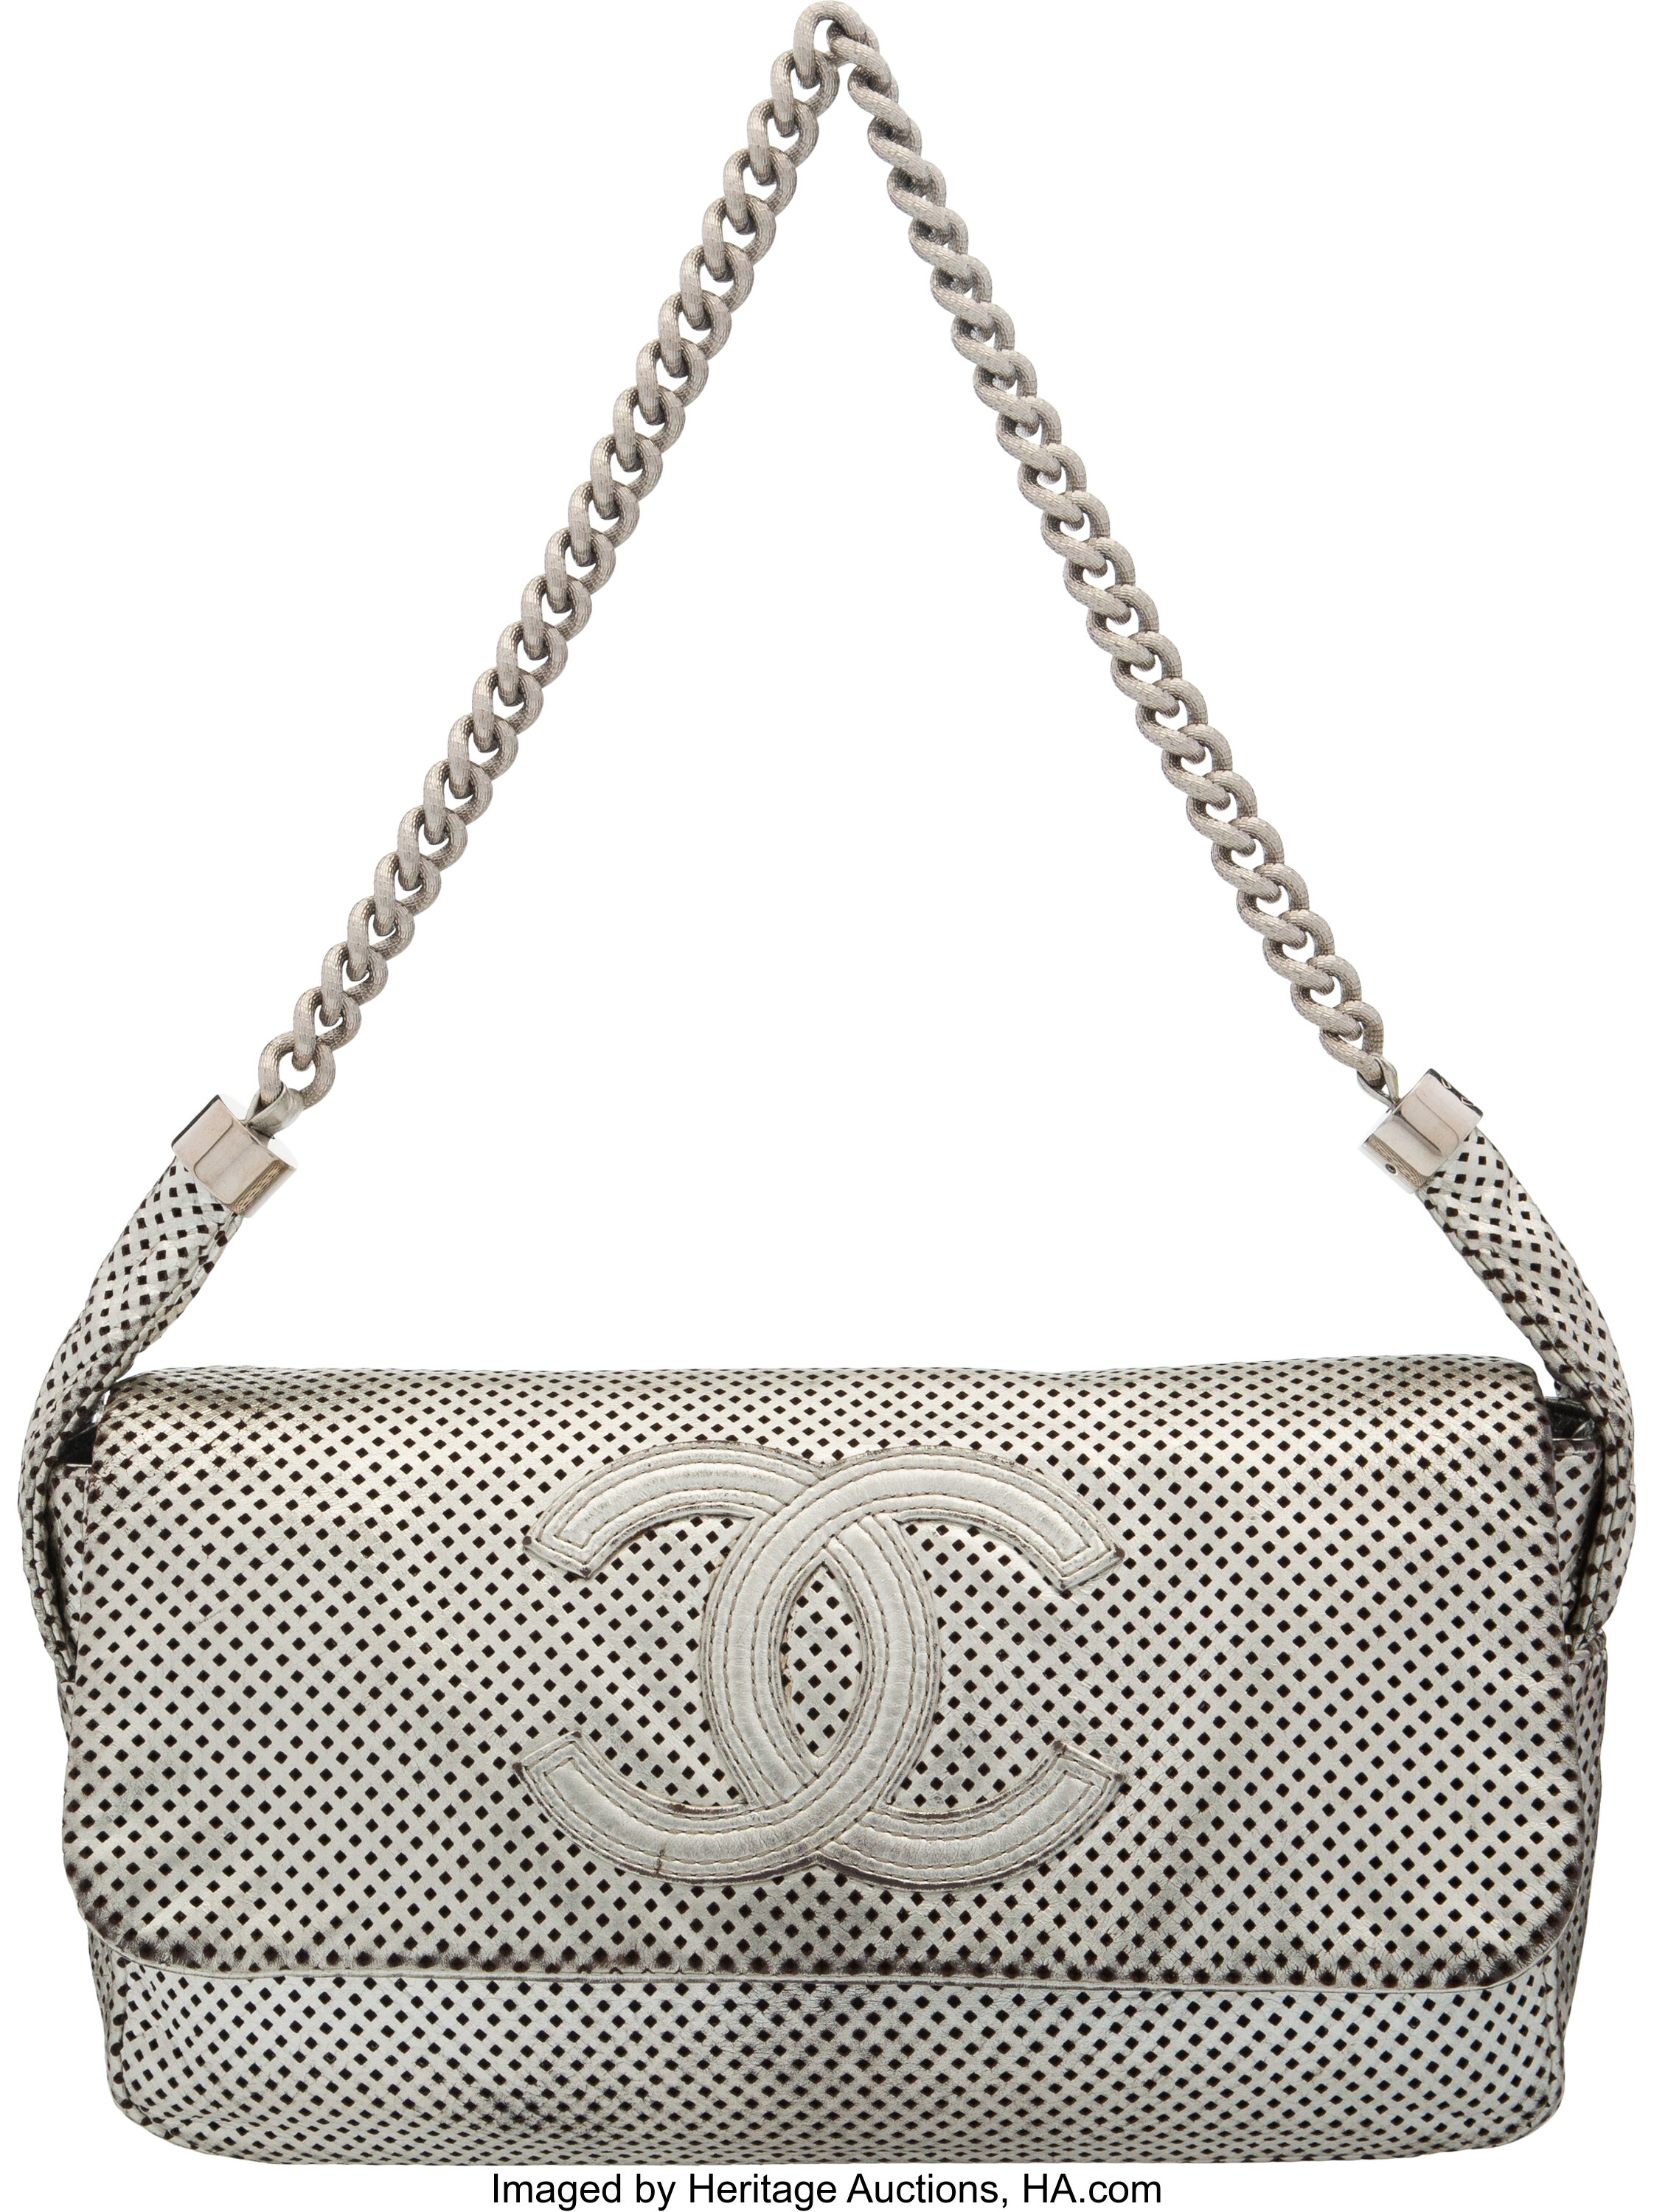 Chanel Silver Perforated Leather Rodeo Drive Shoulder Bag with, Lot #58075